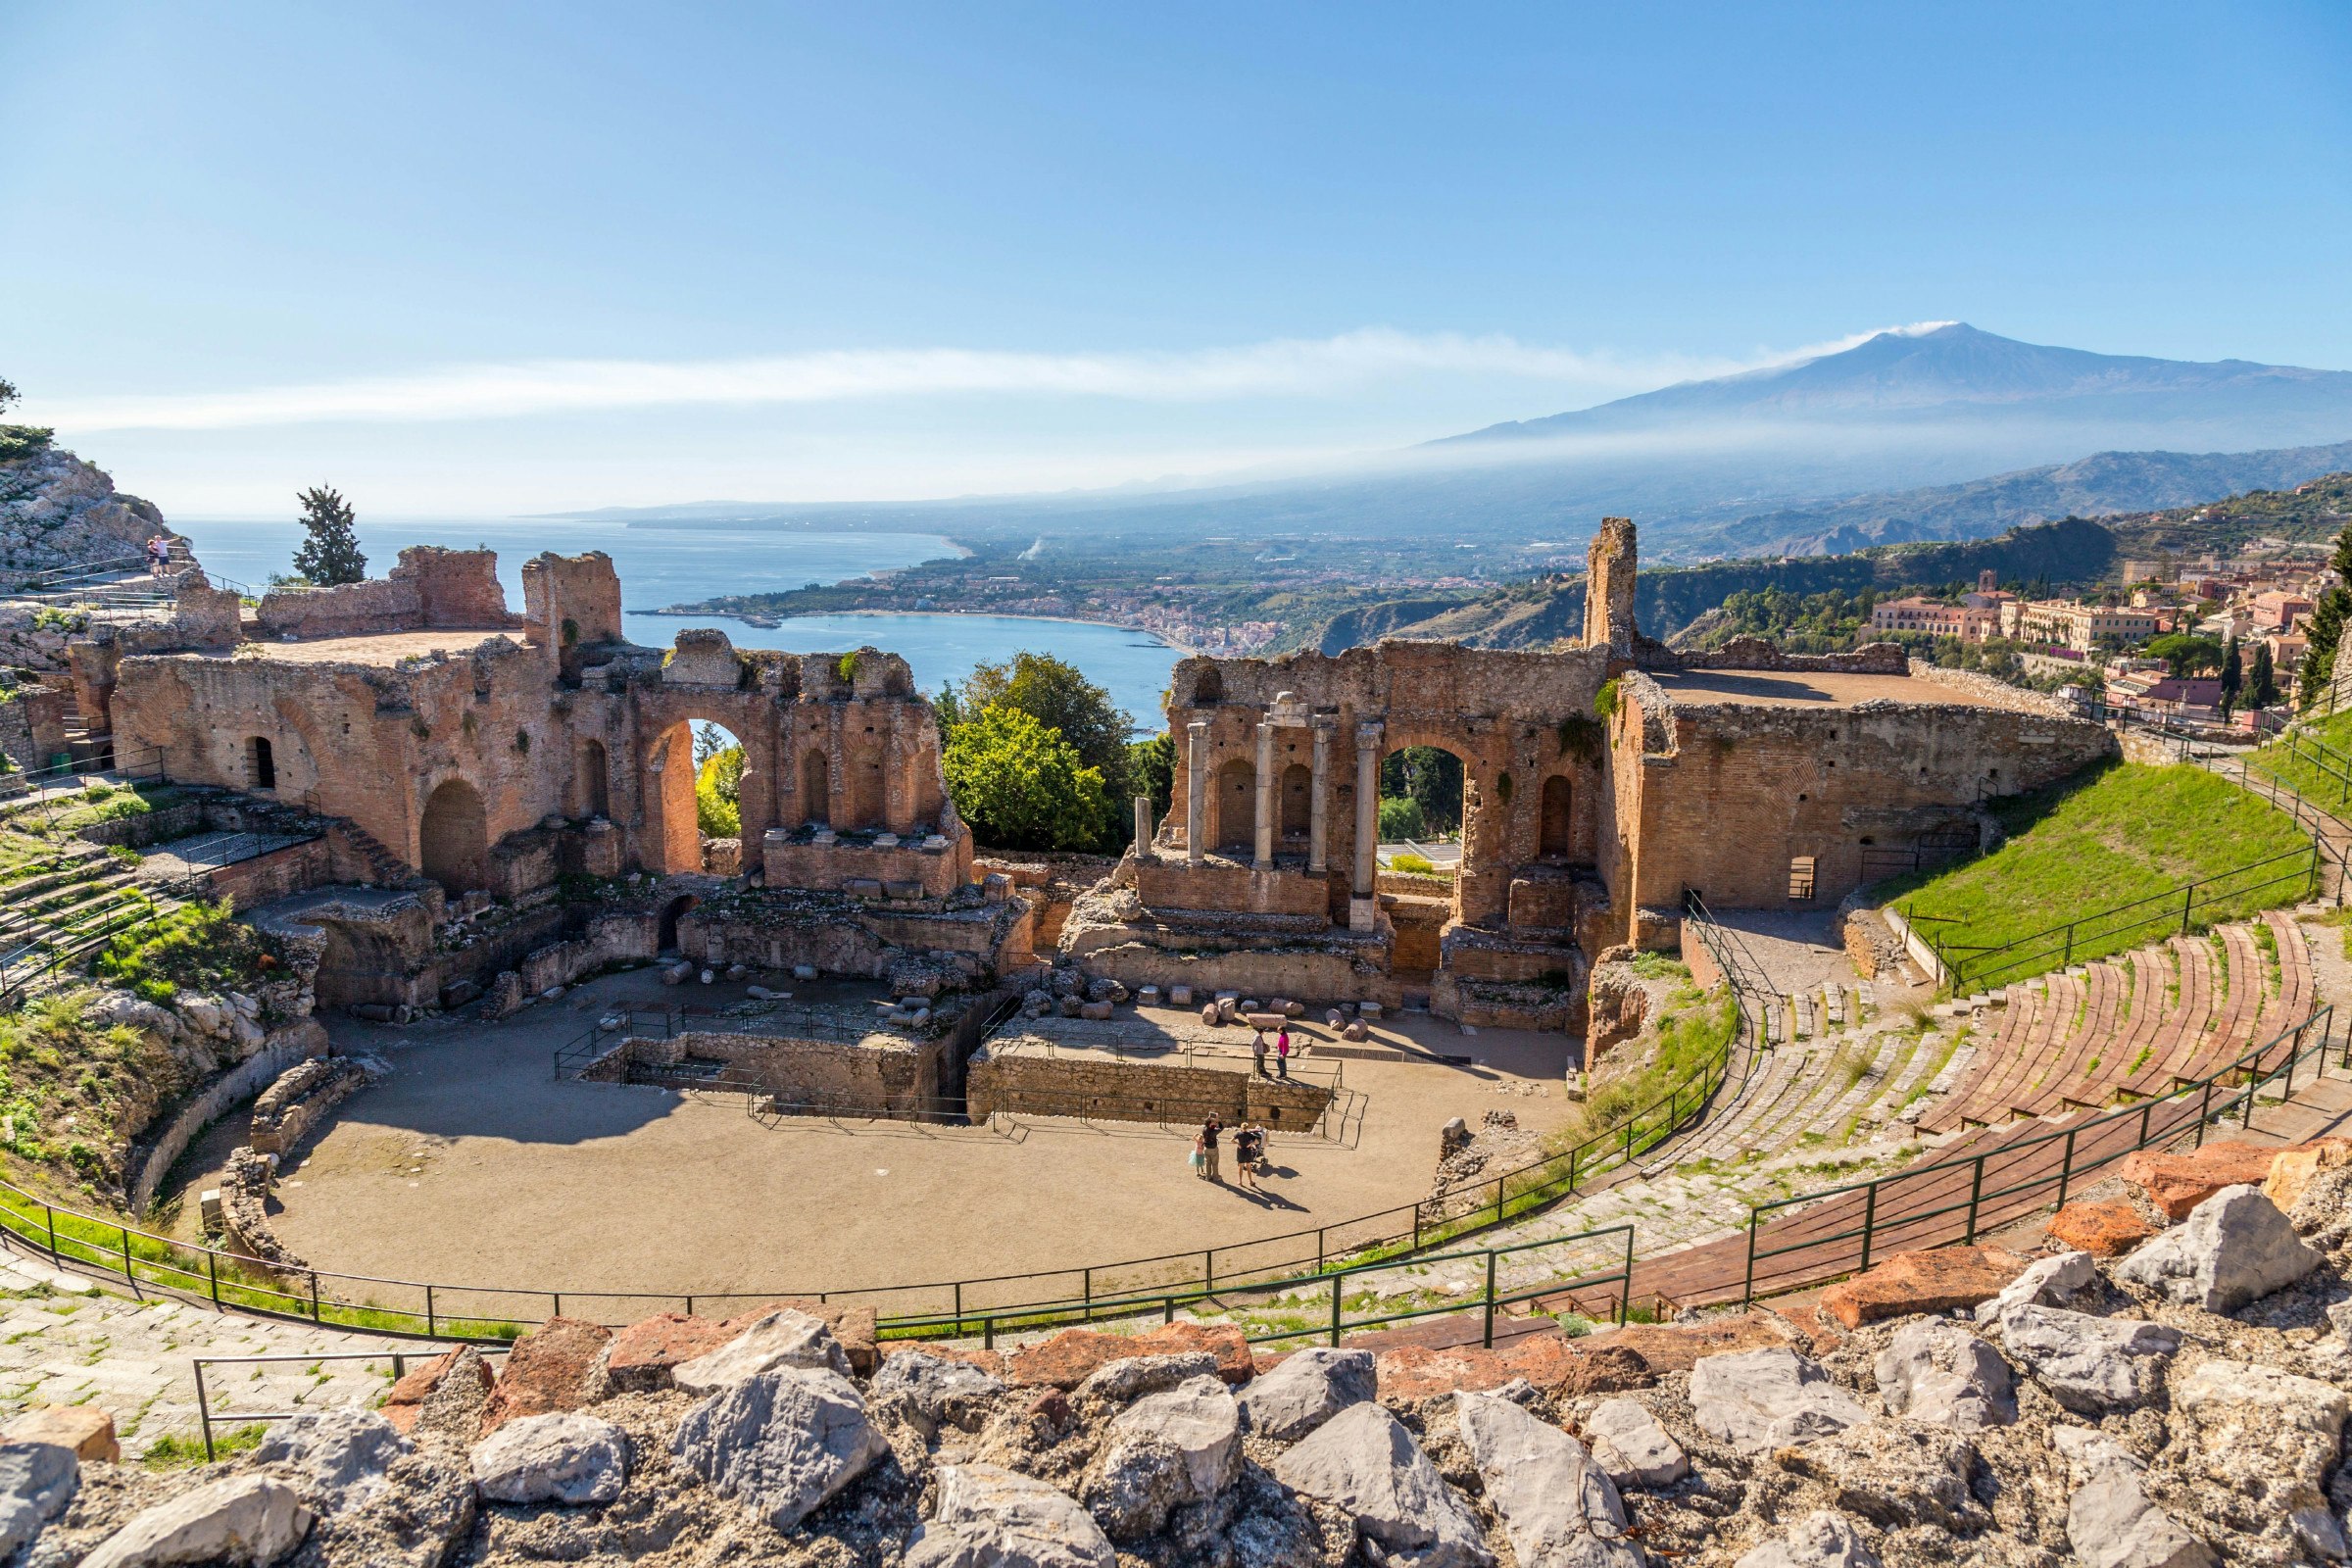 Ruins of the ancient greek theater of Taormina, Sicily the Etna with its double snook tail in the background above the morning sun lit Giardini-Naxos bay of the Ionian see.